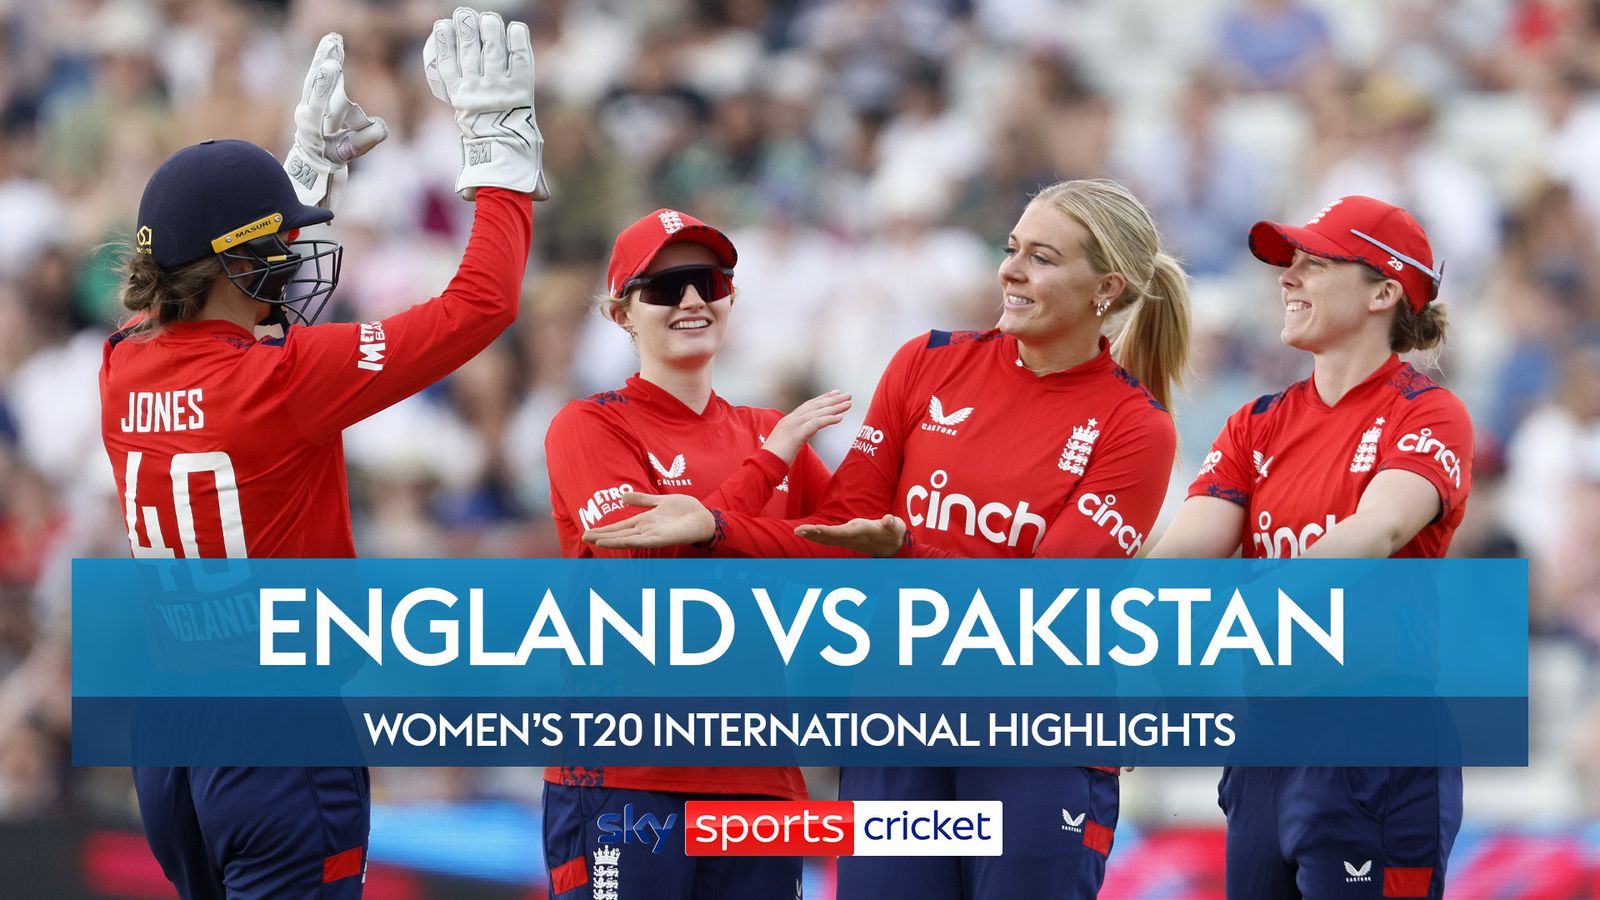 England overcome early wickets to defeat wasteful Pakistan